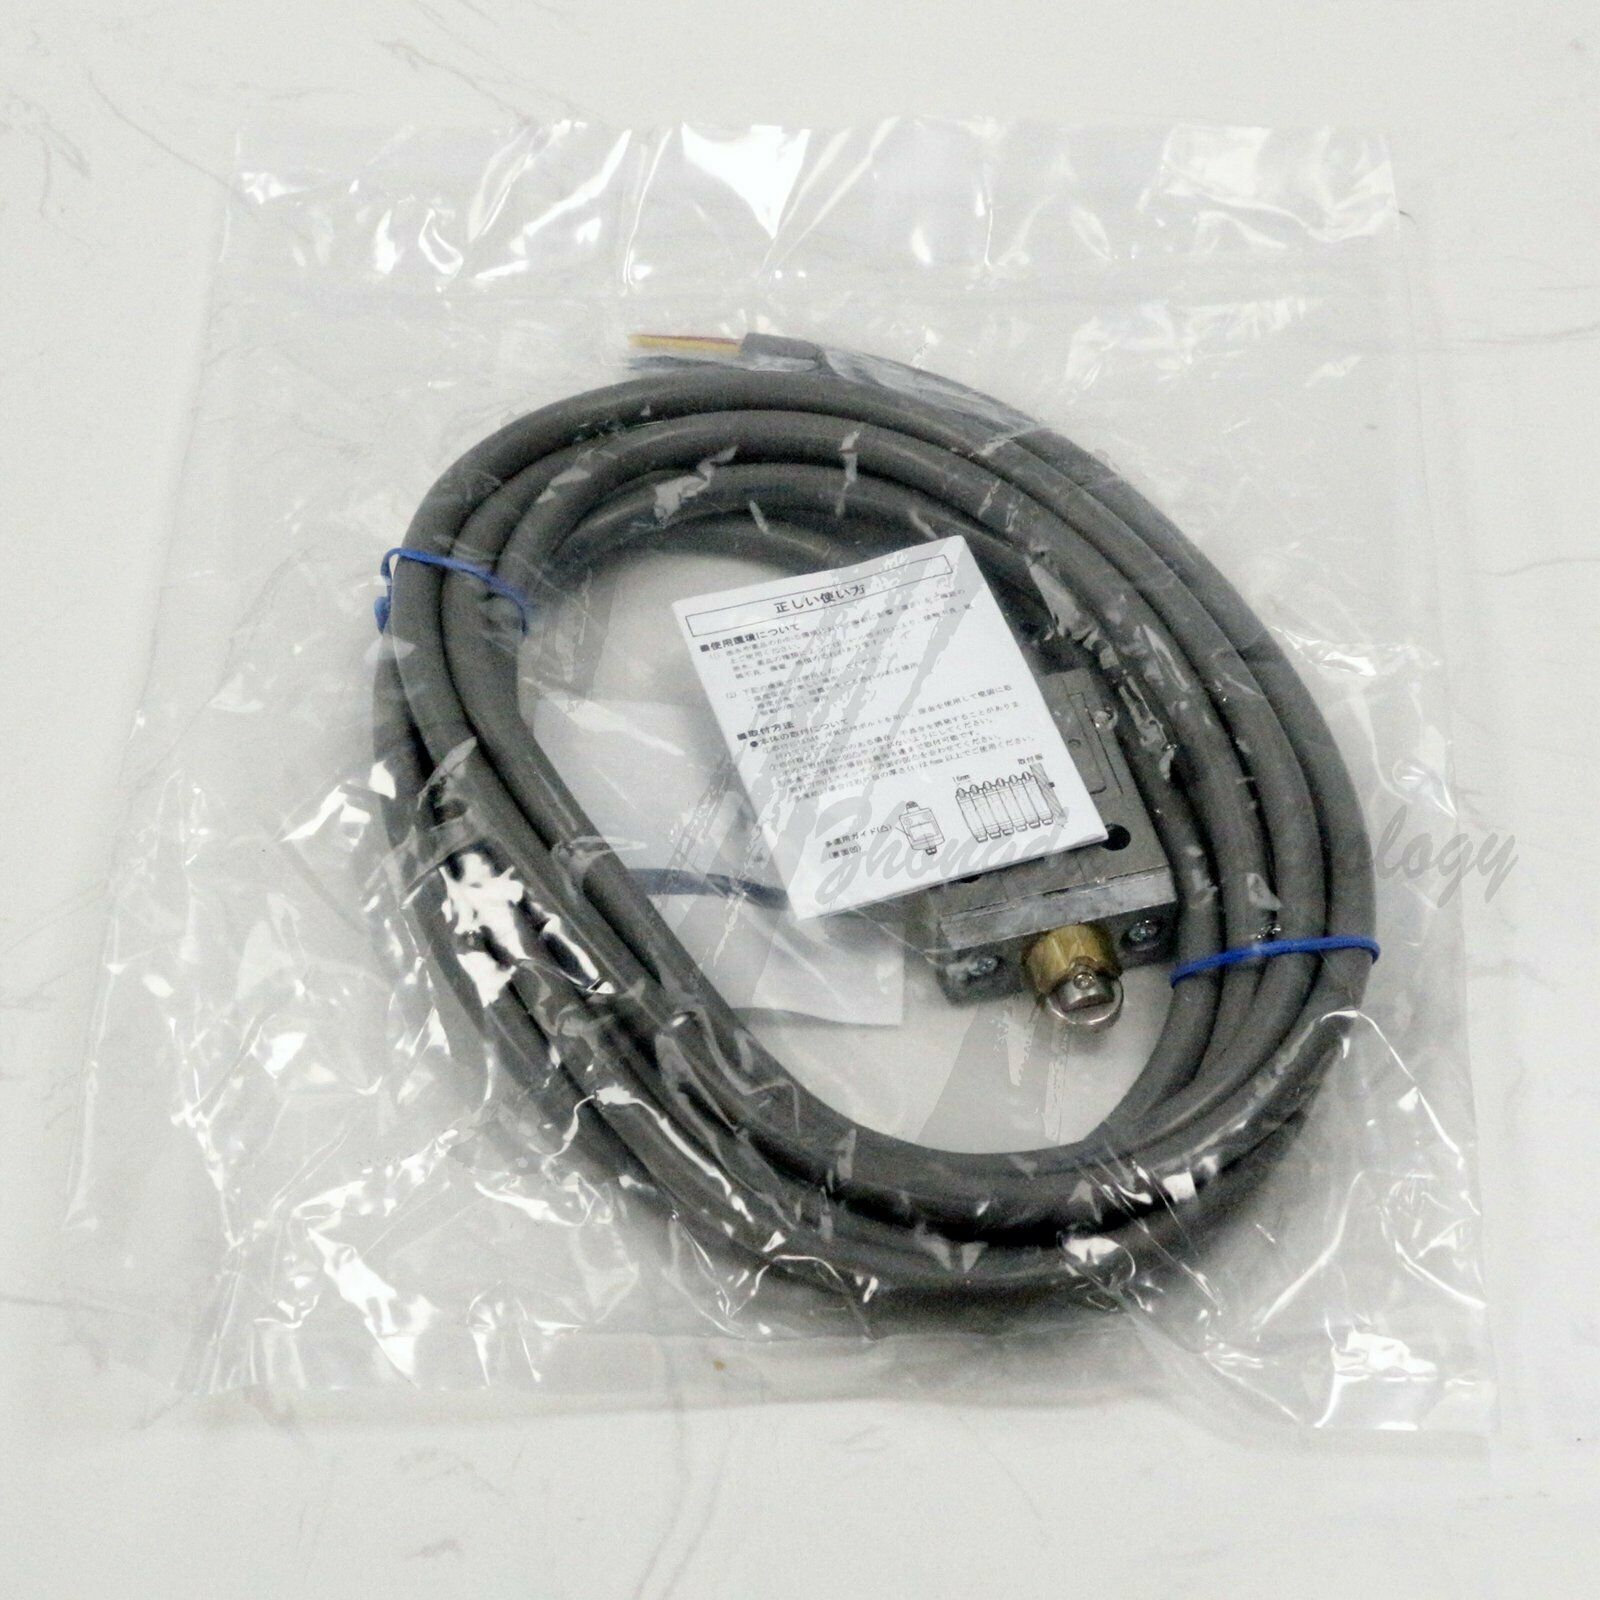 1PCS New In Box Omron Enclosed Switch D4C-1602  D4C1602 One year warranty KOEED 1, 80%, import_2020_10_10_031751, Omron, Other